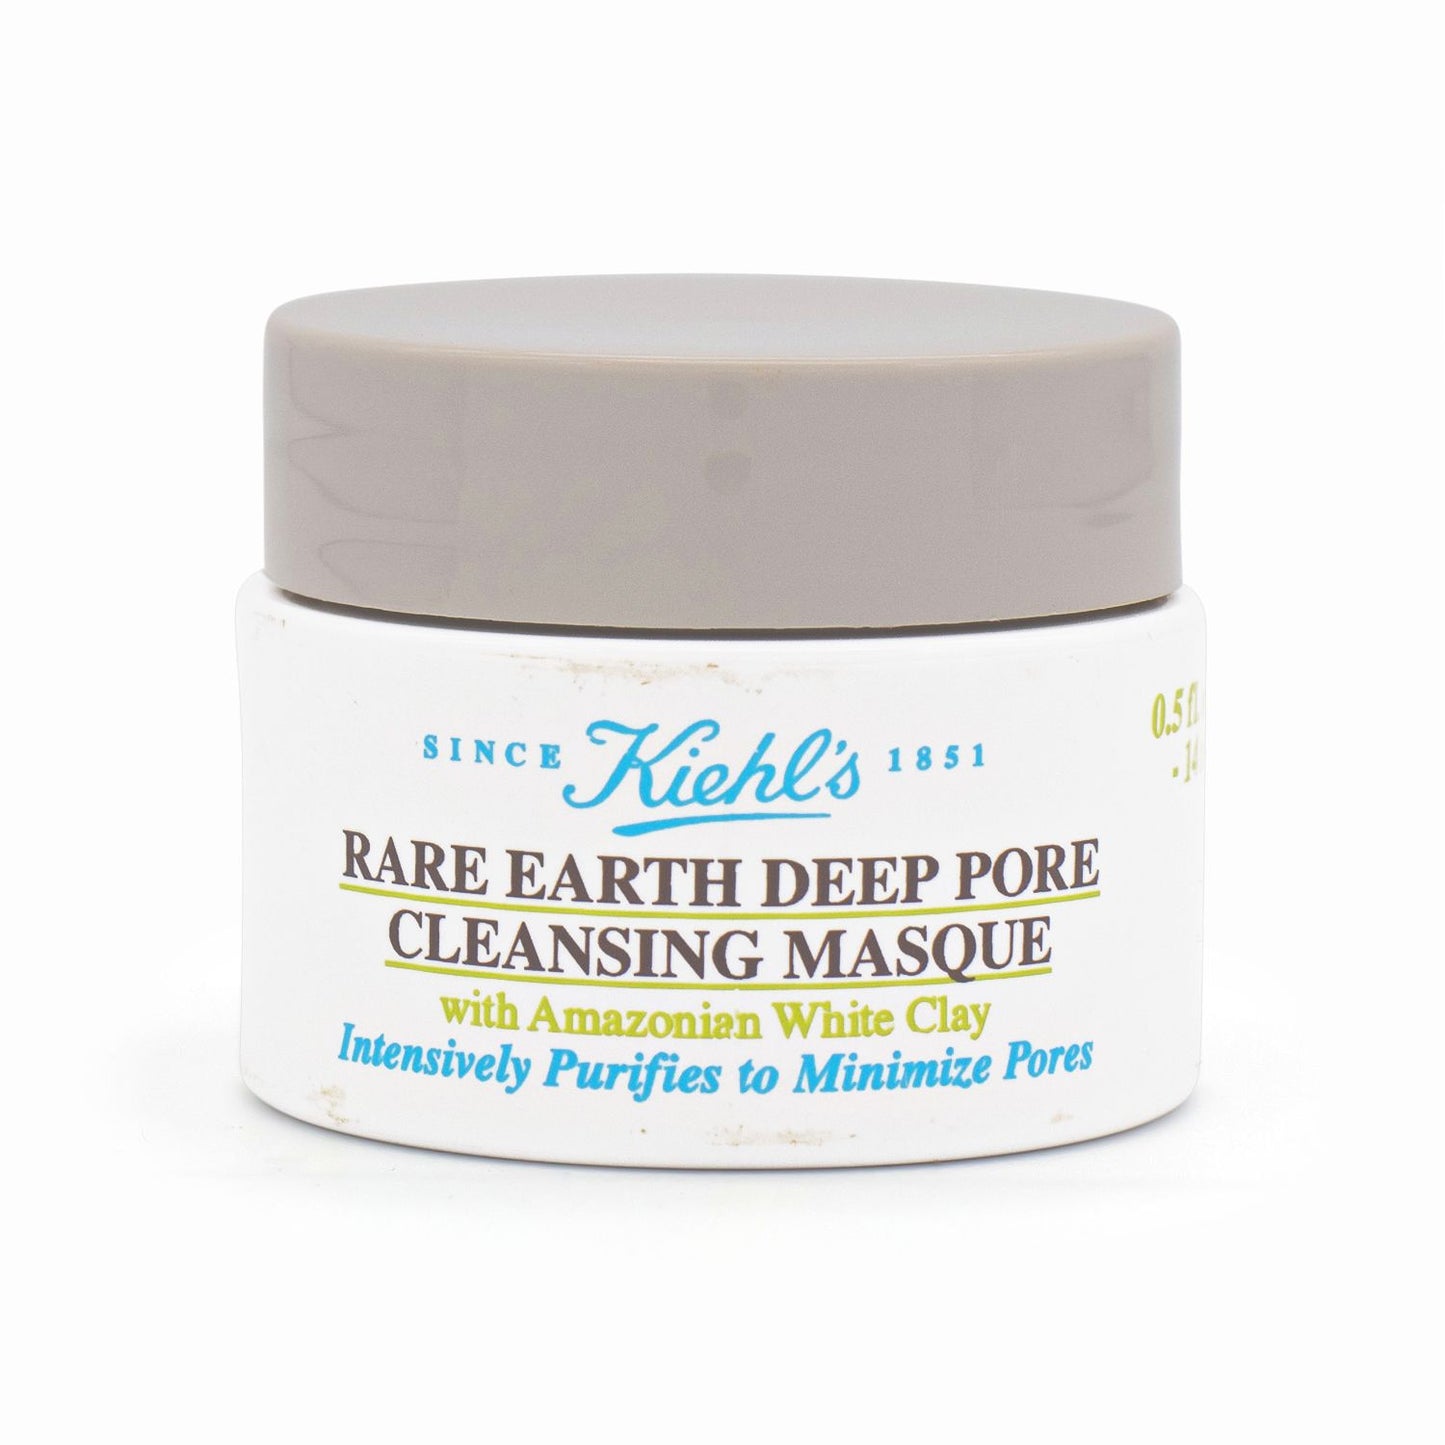 Kiehl's Rare Earth Deep Pore Cleansing Masque 14ml - Imperfect Container